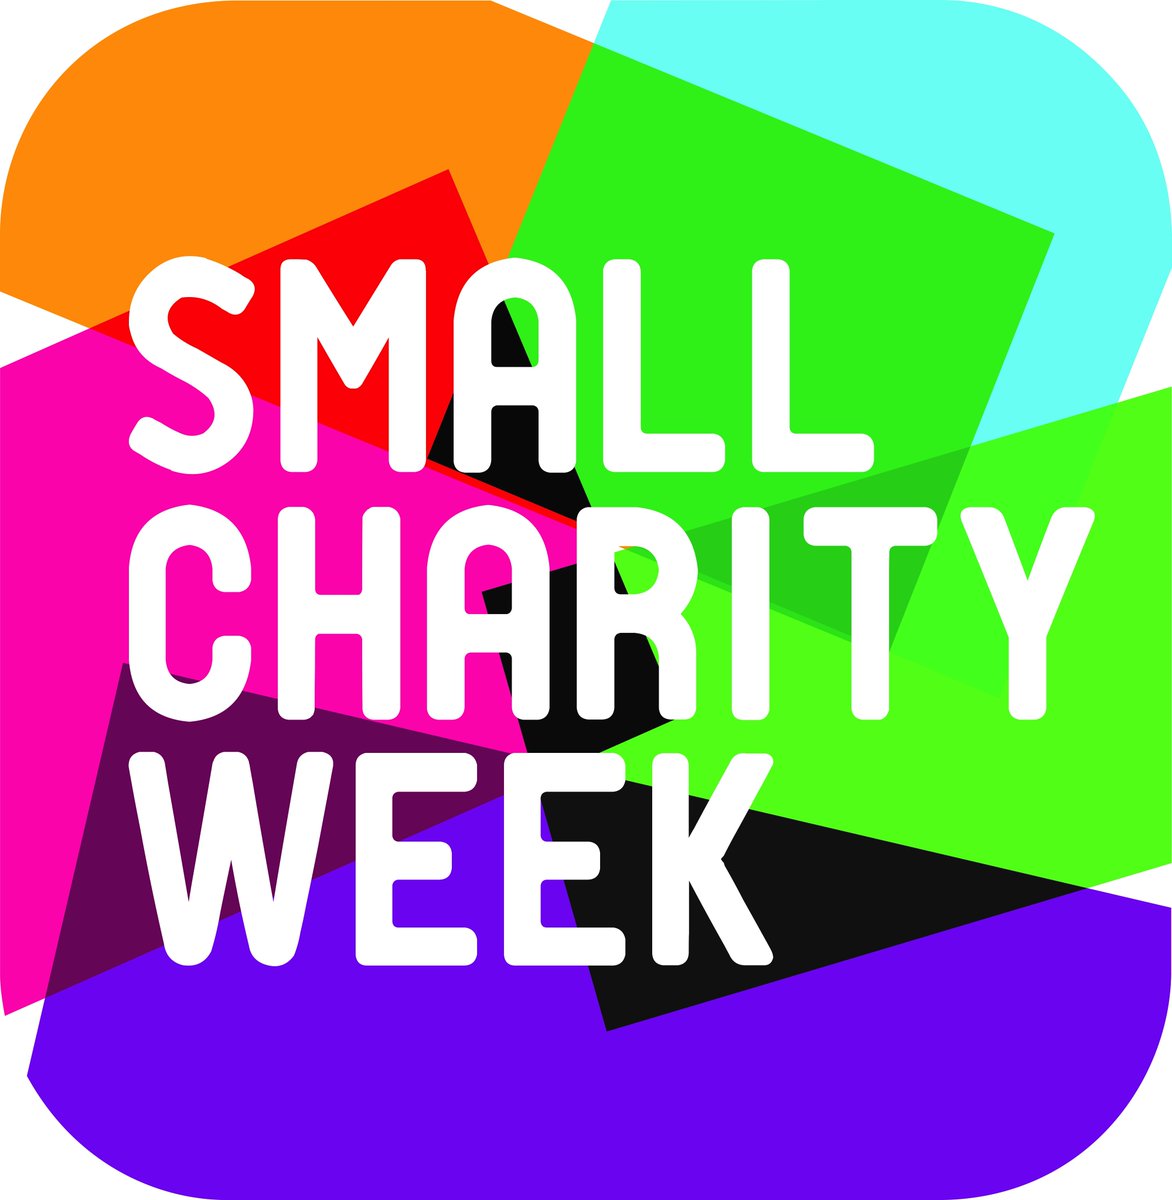 This week is Small Charity Week. #woking is so lucky to have such wonderful #smallcharities supporting its residents. Thank you for all the amazing and hard work you do! 

#wearewoking #volunteerwoking #SmallCharityWeek